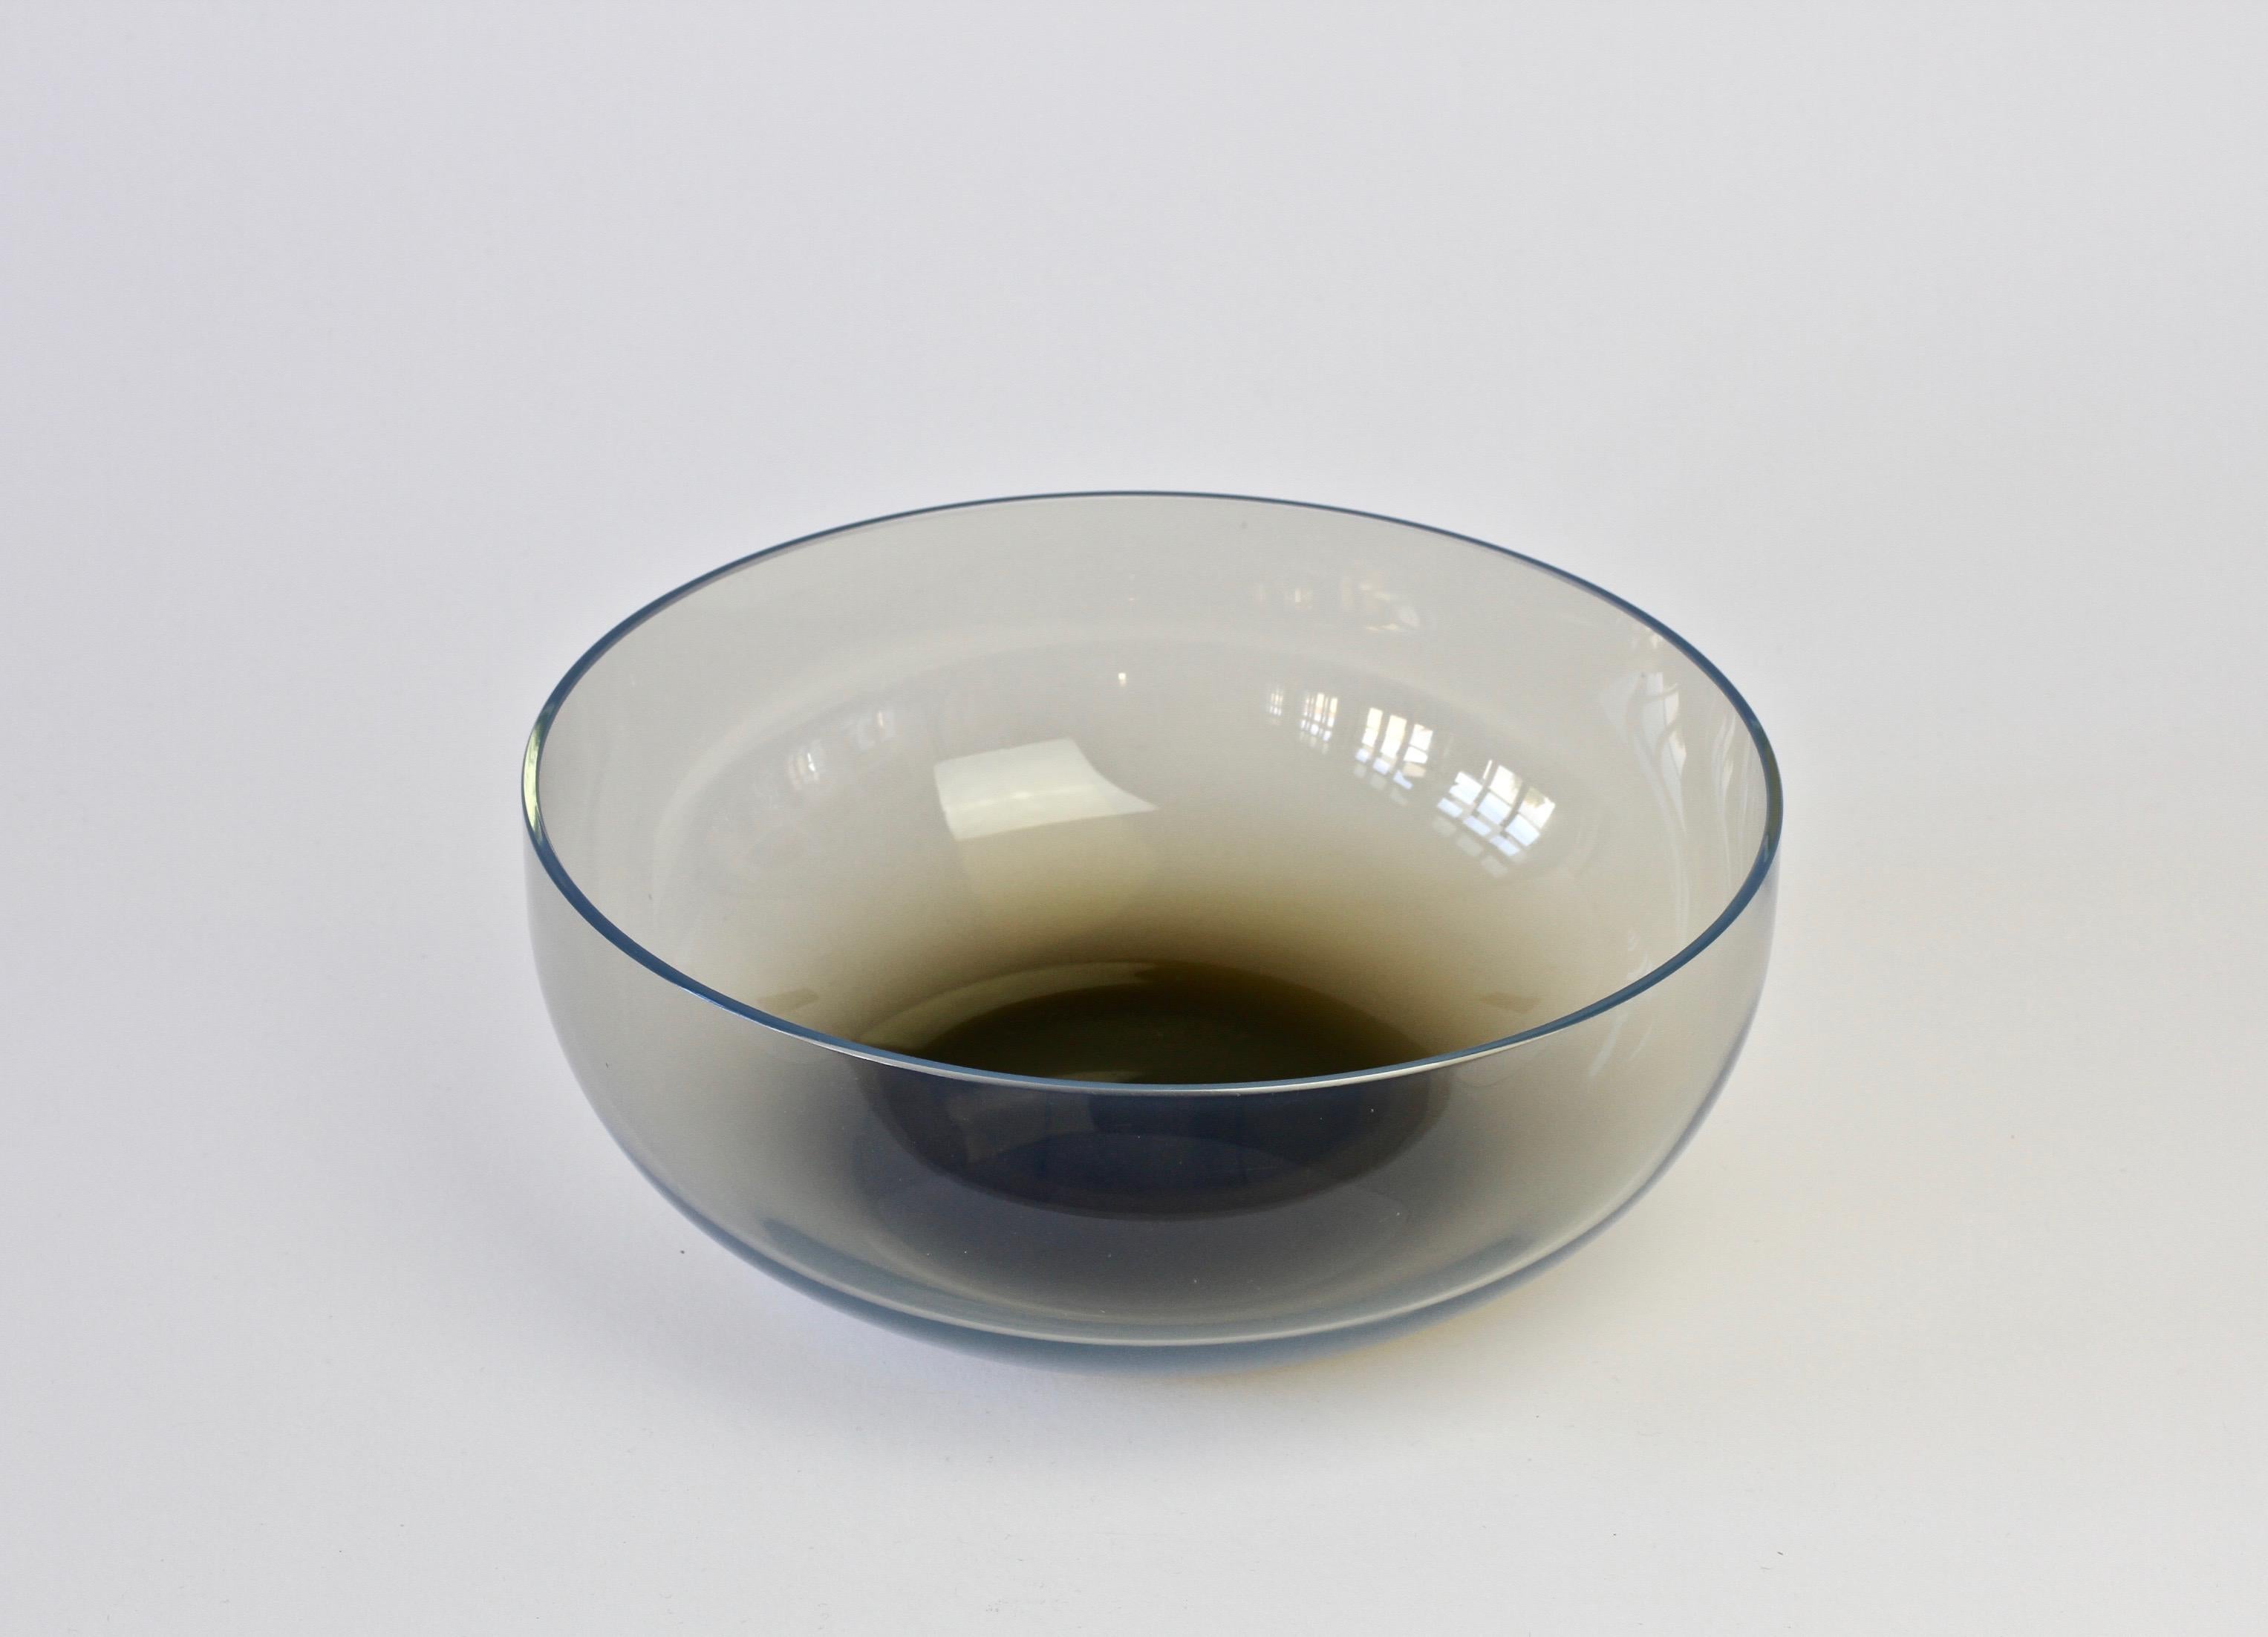 Single midcentury, vintage 'Opalino' Murano glass bowl designed by Antonio da Ros (1936-2012) for Cenedese, circa 1970-1990. Wonderful translucent color of 'smoked mushroom' gray (grey) with a secondary layer of blue glass. Simplistic yet elegant